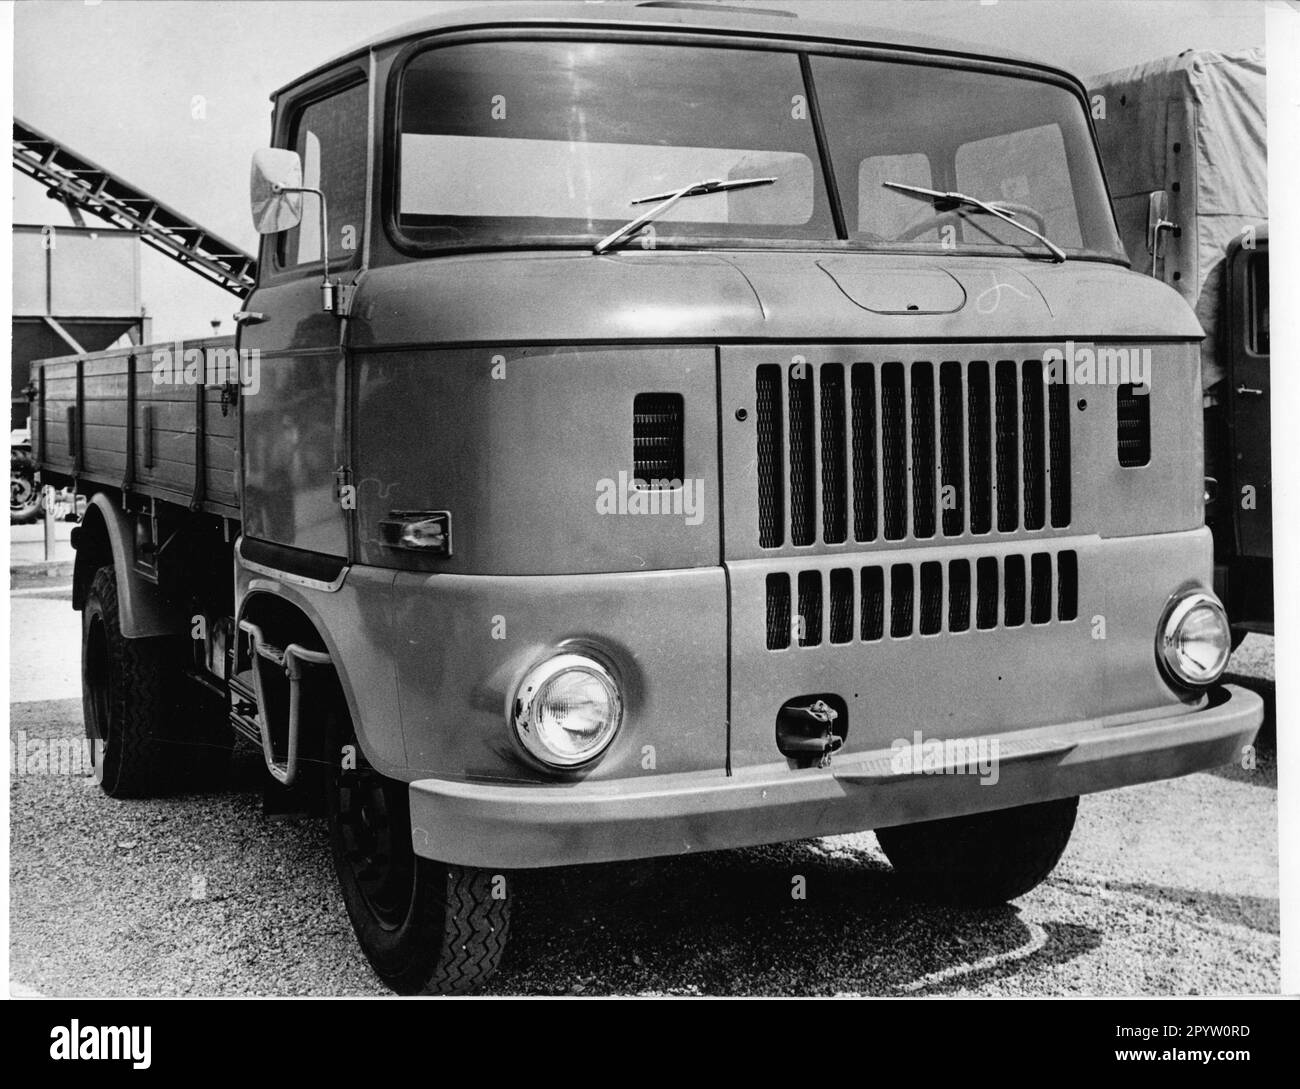 The truck W50 L/K. Manufactured in the automobile factory Ludwigsfelde.vehicles.GDR-operations. Photo: MAZ/Leon Schmidtke, late 60s, early 70s. [automated translation] Stock Photo